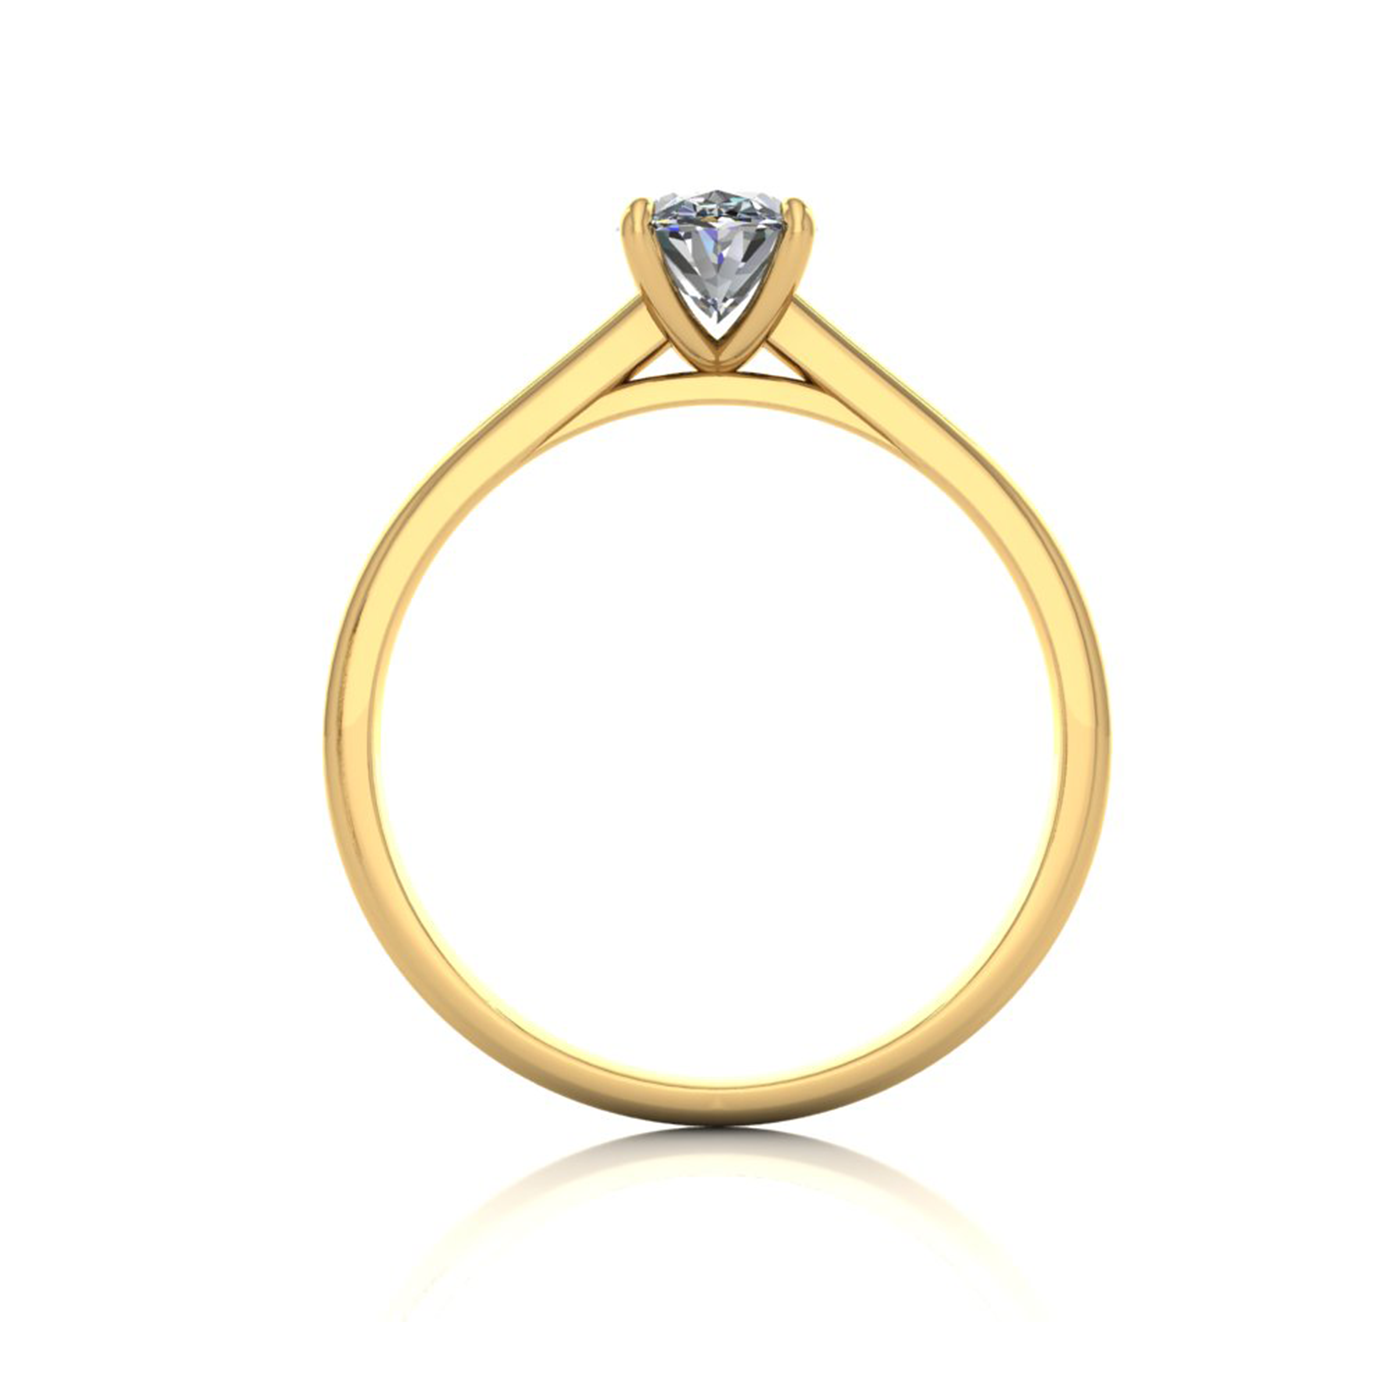 18k yellow gold  0,80 ct 4 prongs solitaire oval cut diamond engagement ring with whisper thin band